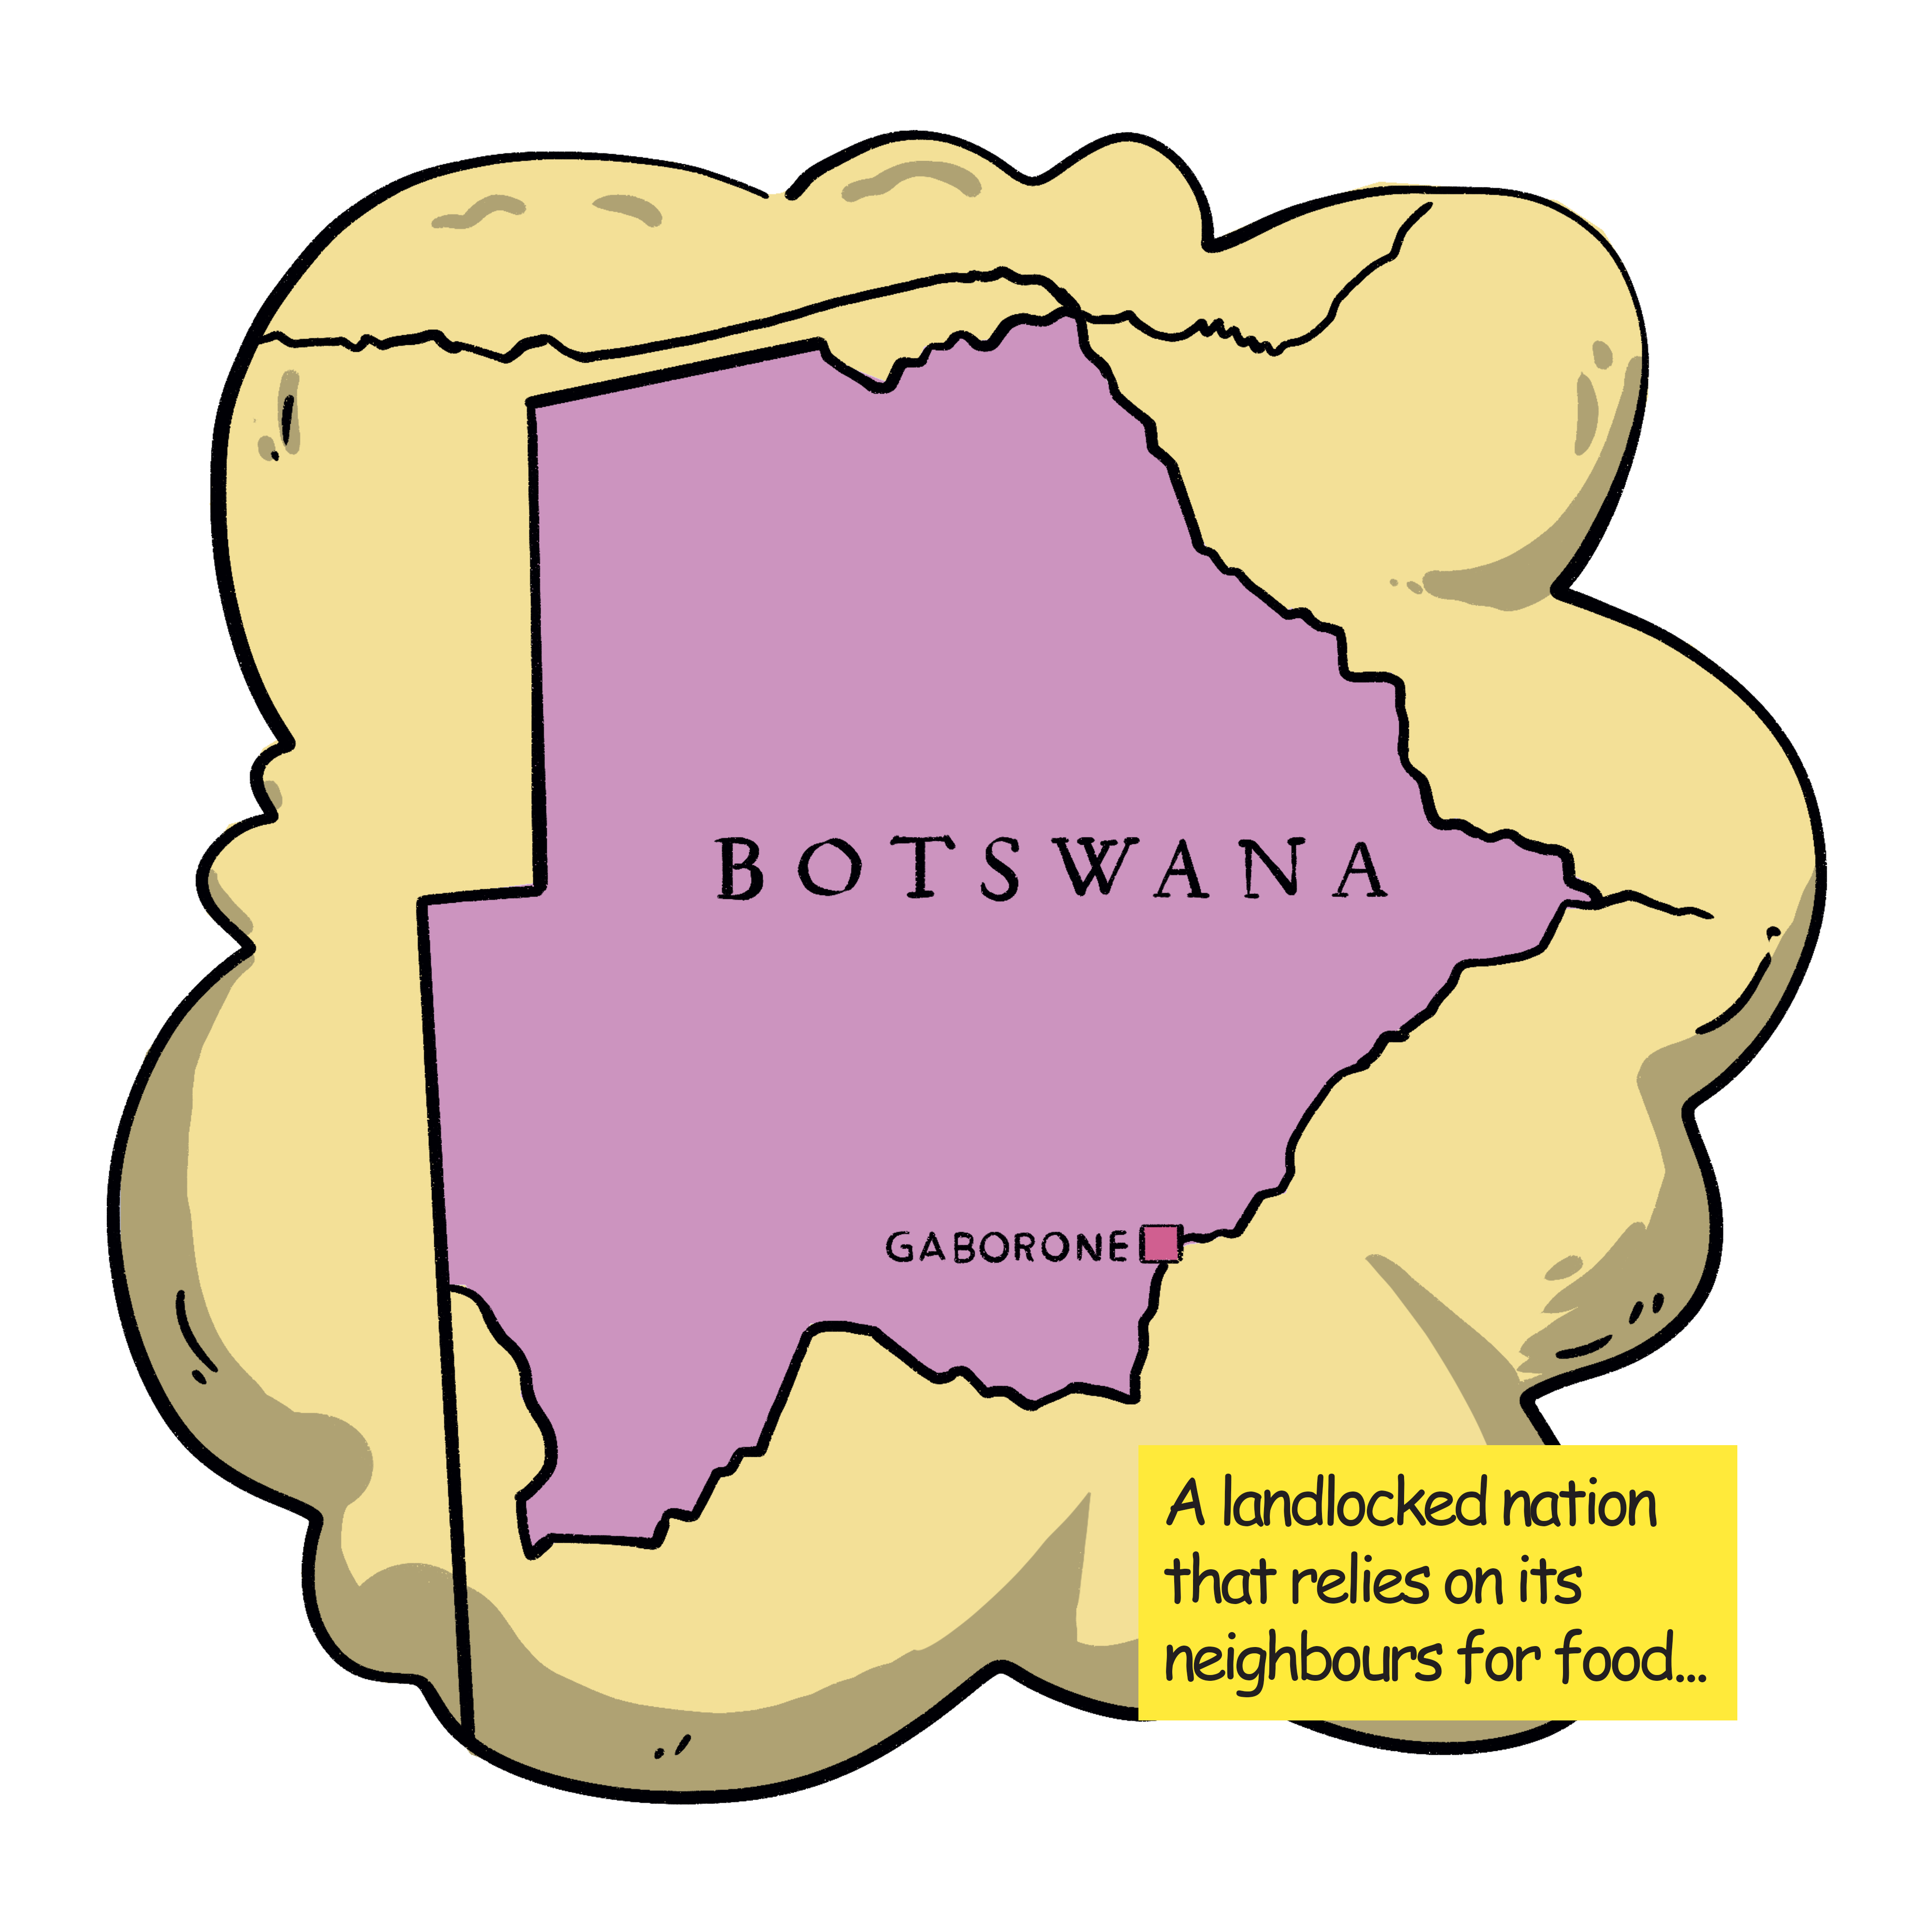 Botswana is a landlocked nation that relies on its neighbours for sufficient food.